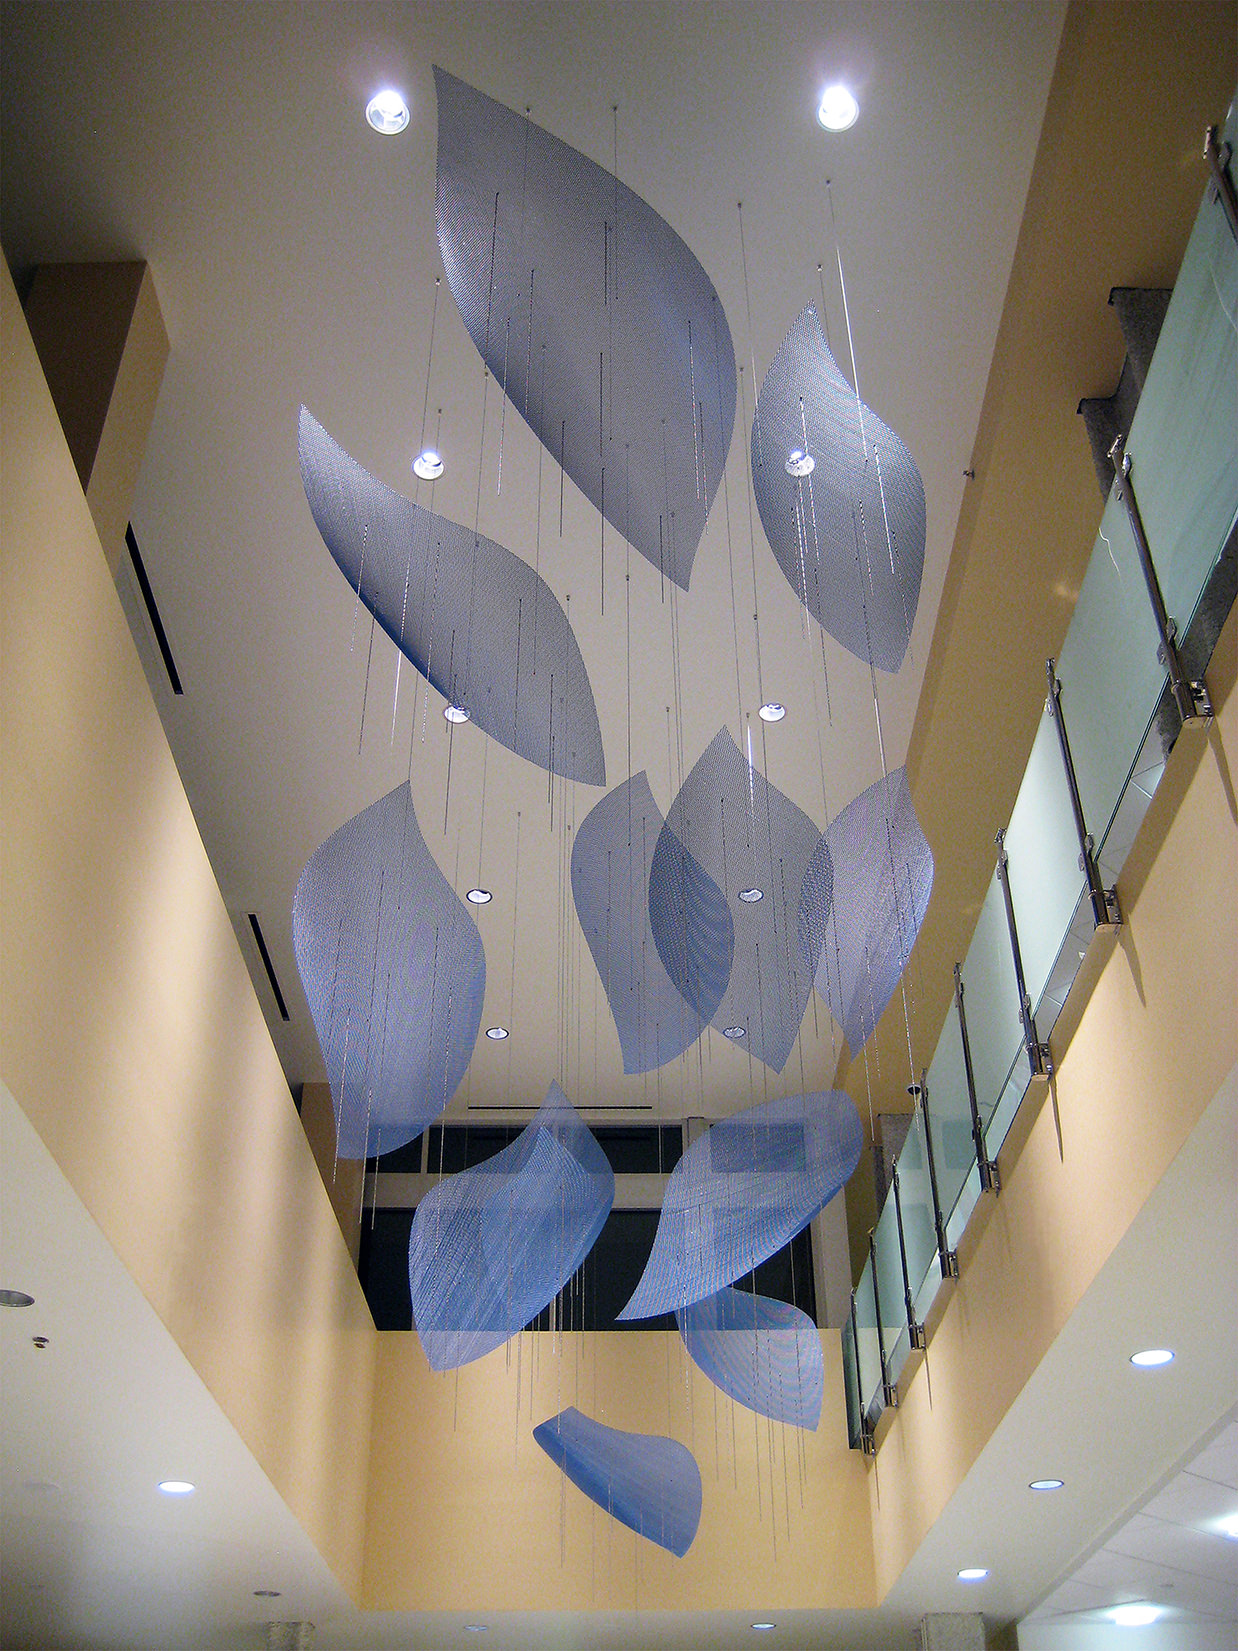 Crescendo suspended sculpture by Talley Fisher in George and Julia Argyros Health Center